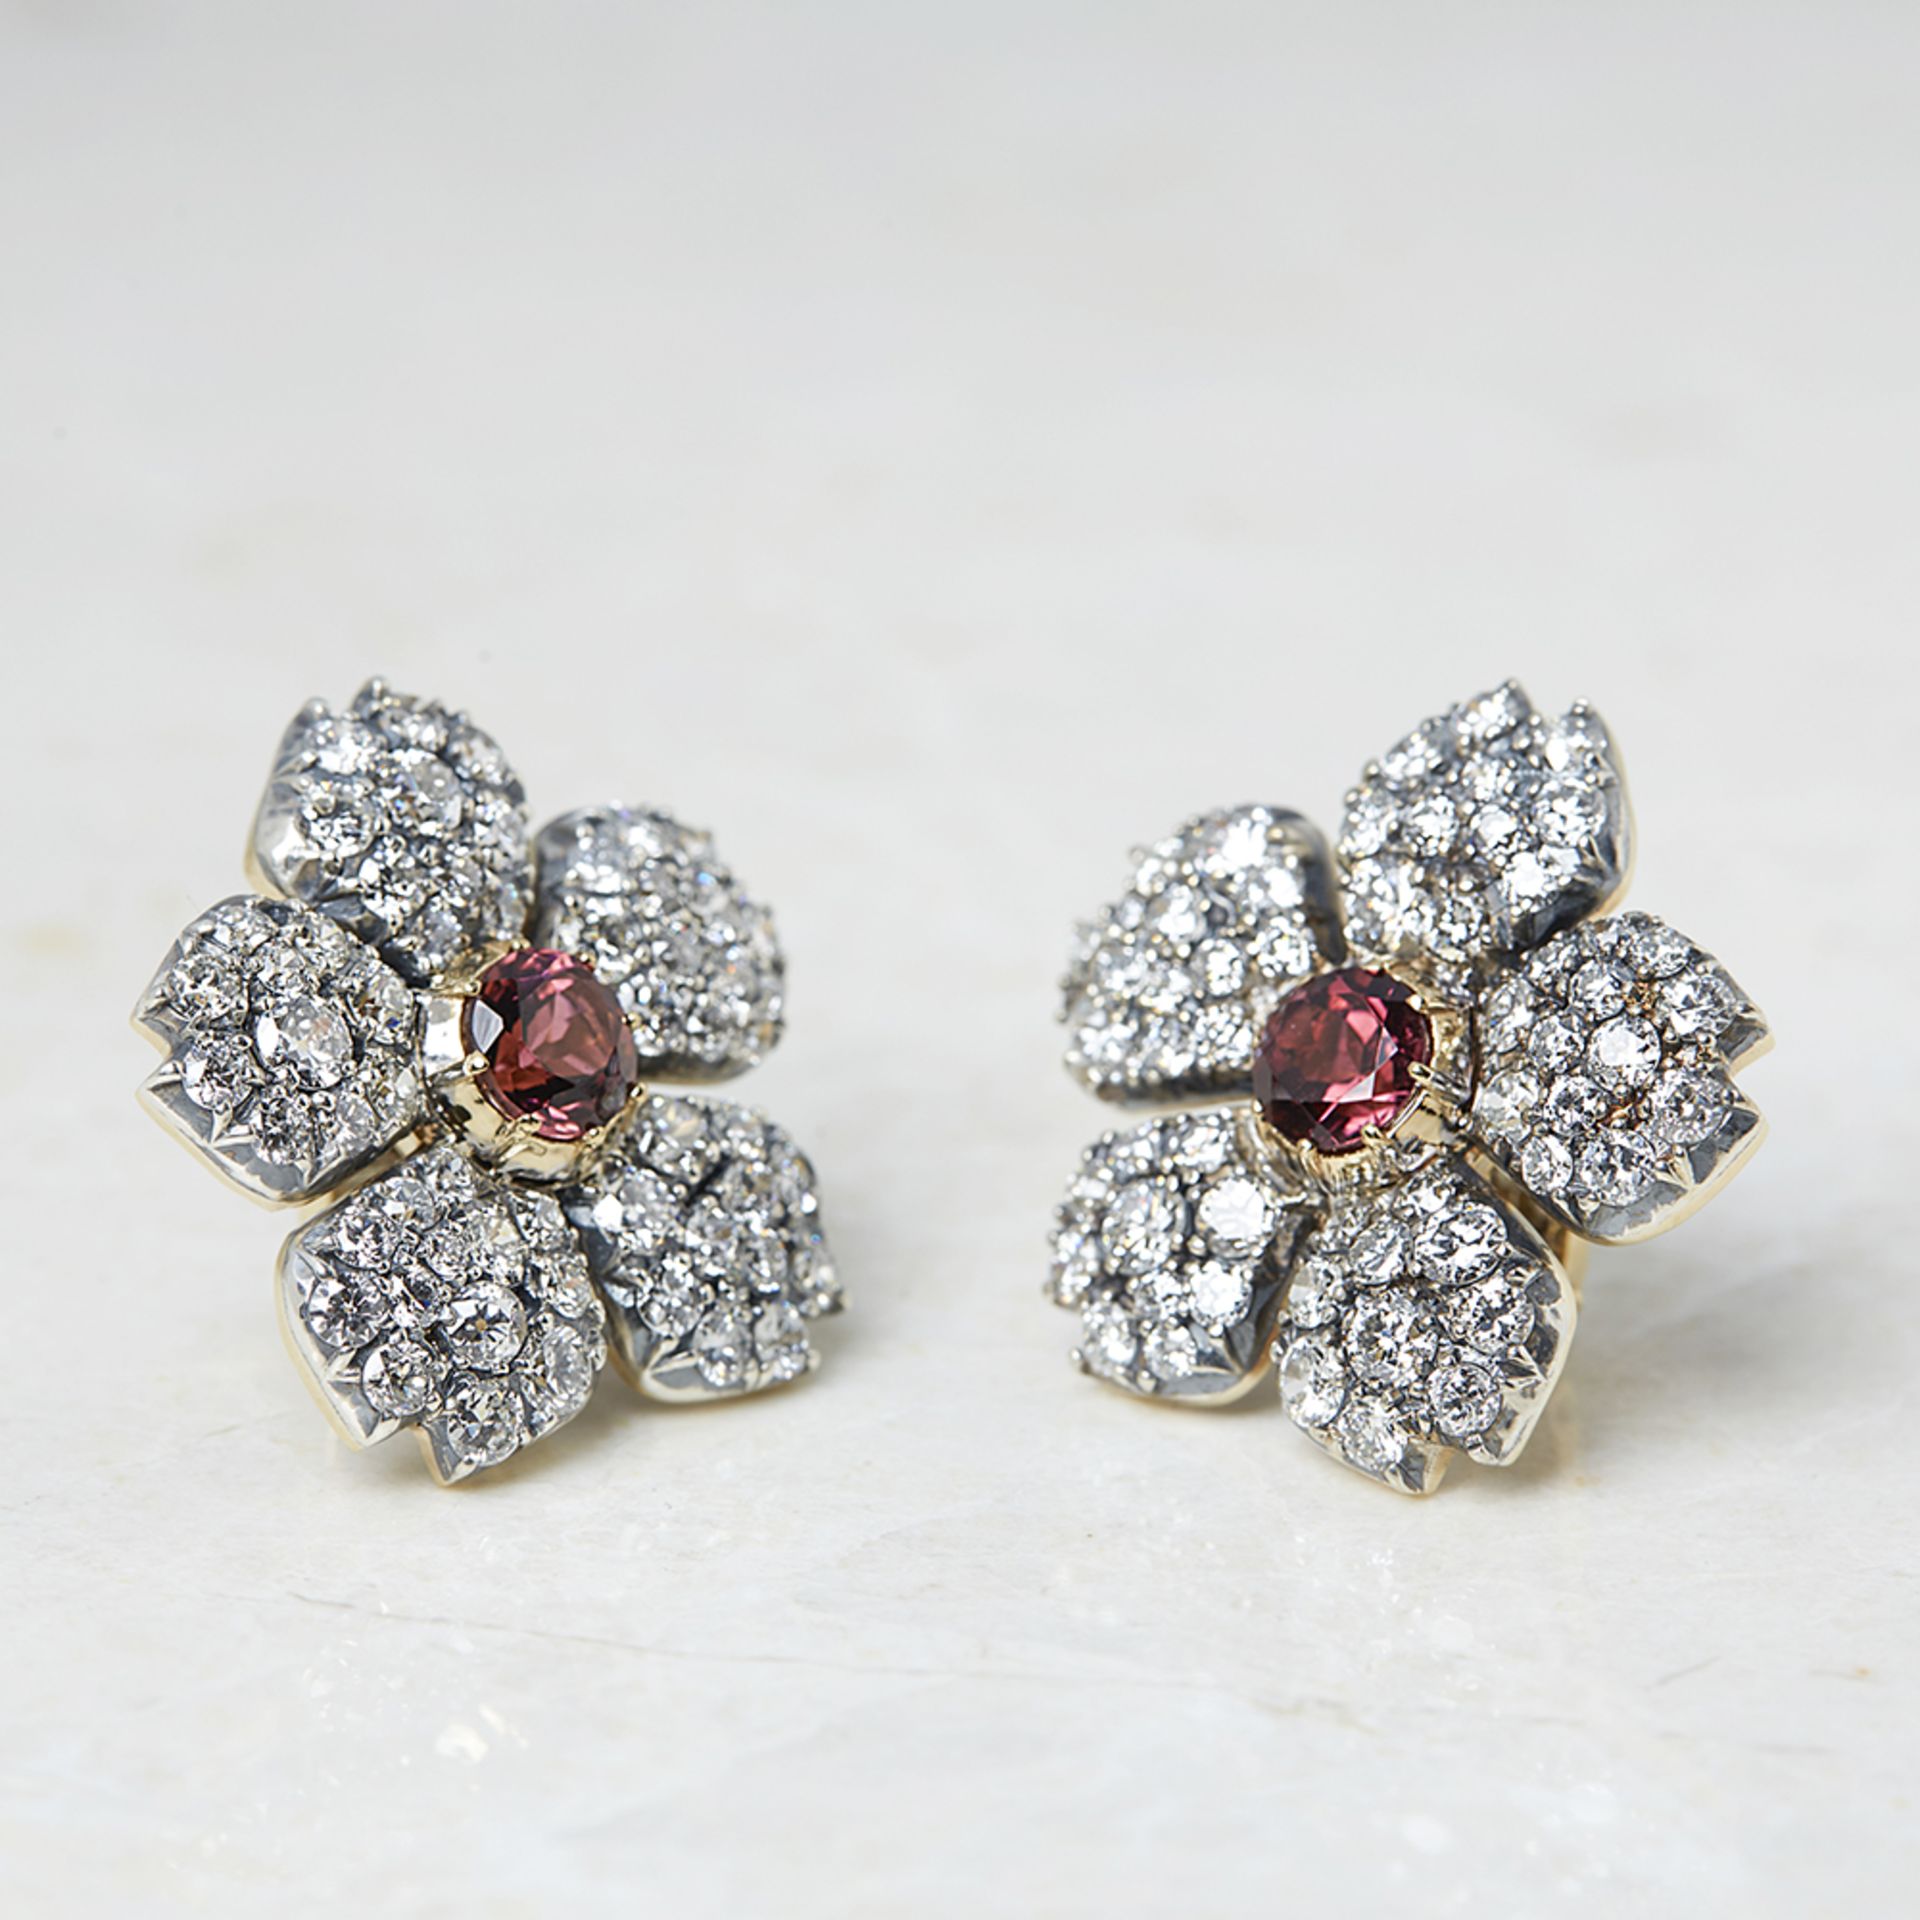 Cartier 18k White Gold 3.07ct Pink Tourmaline & 5.10ct Diamond Flower Earrings with Cartier Box - Image 2 of 8